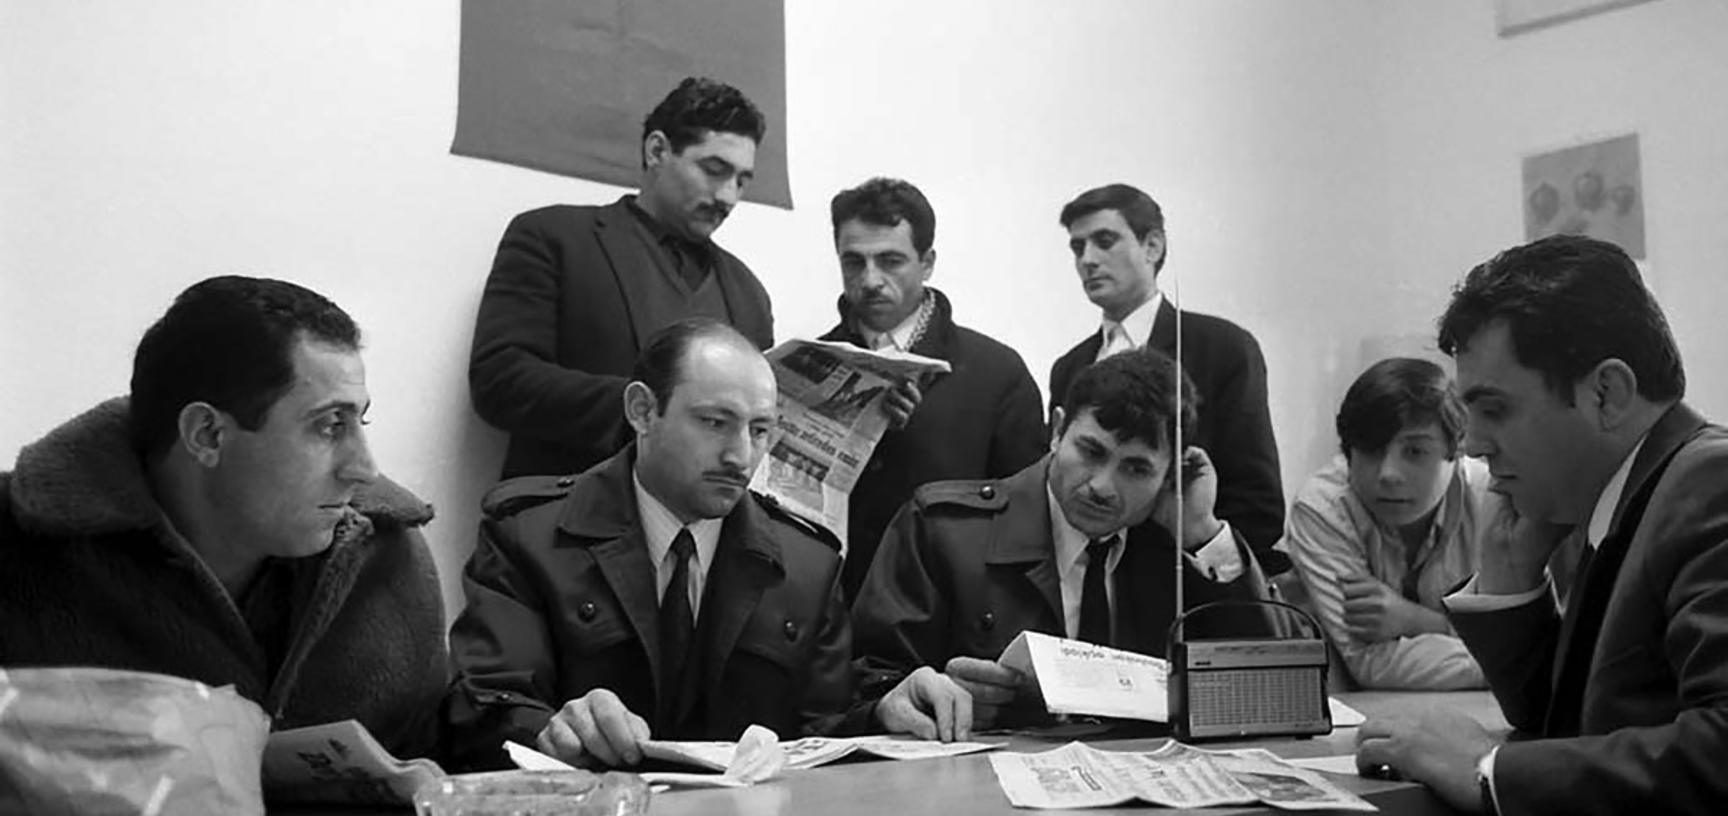 Group of men listening to radio and reading newspapers